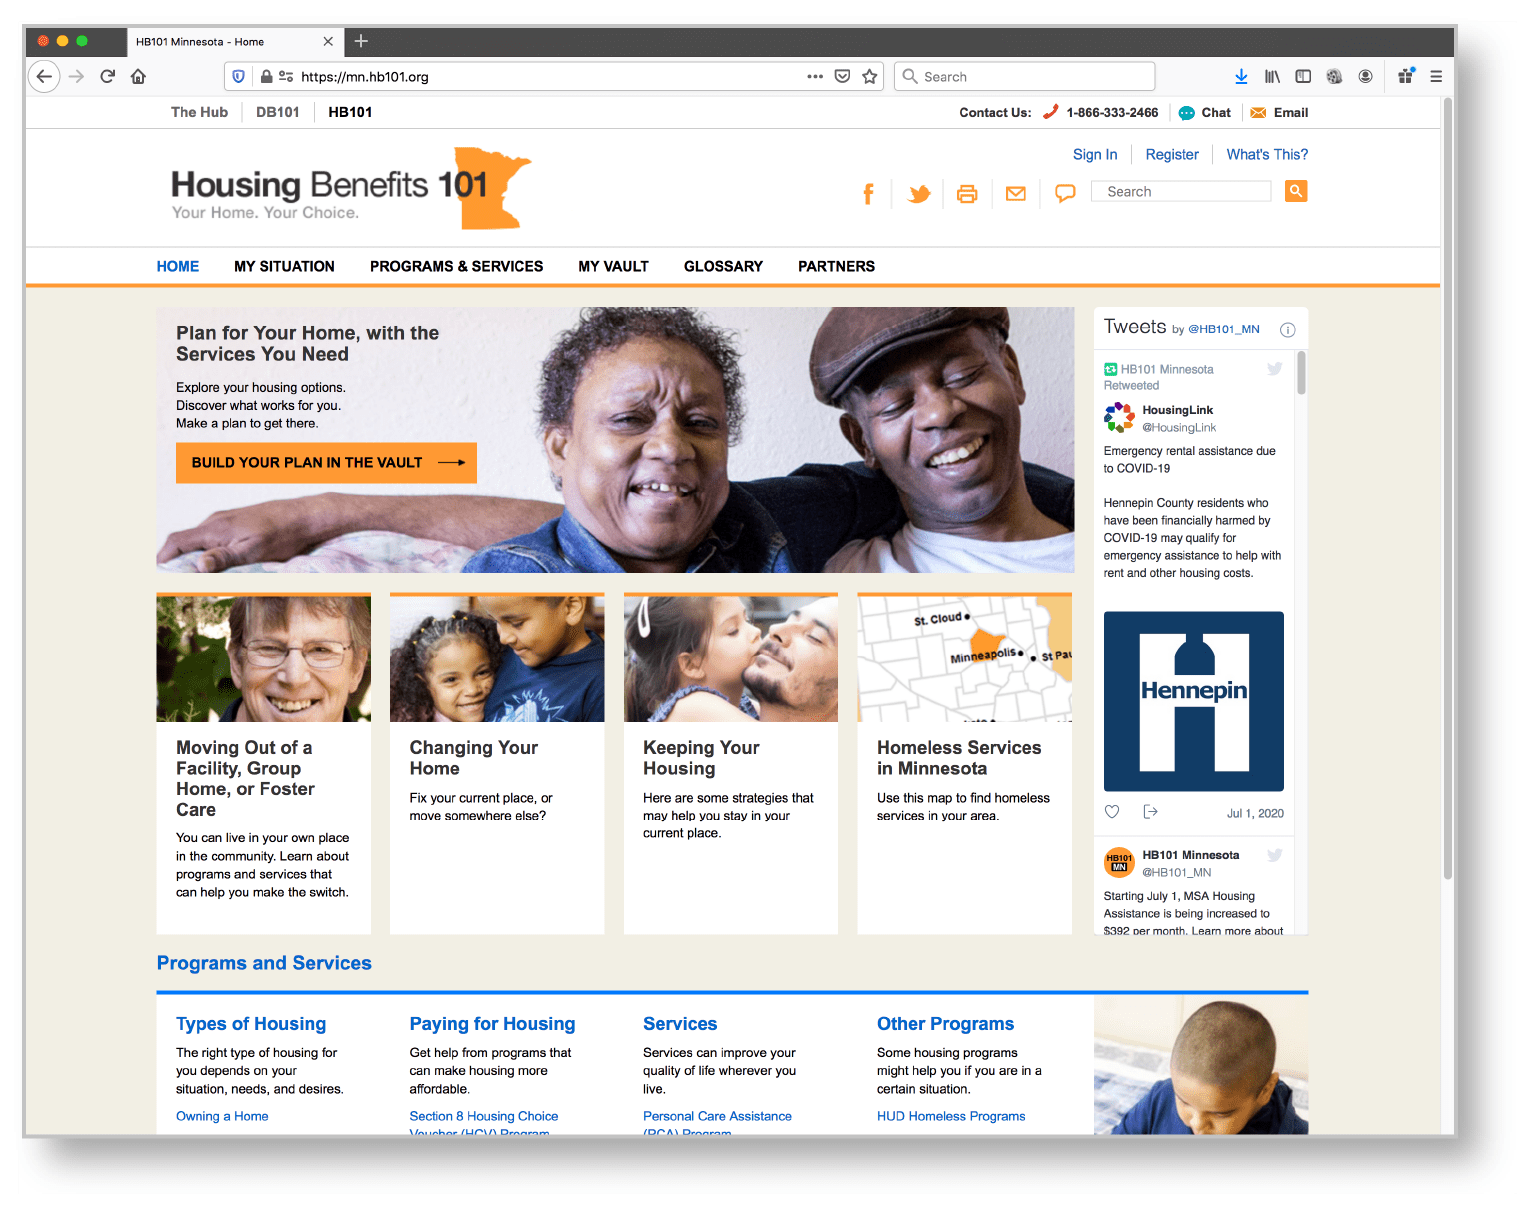 A screenshot of the home page of the Housing Benefits 101 web page.